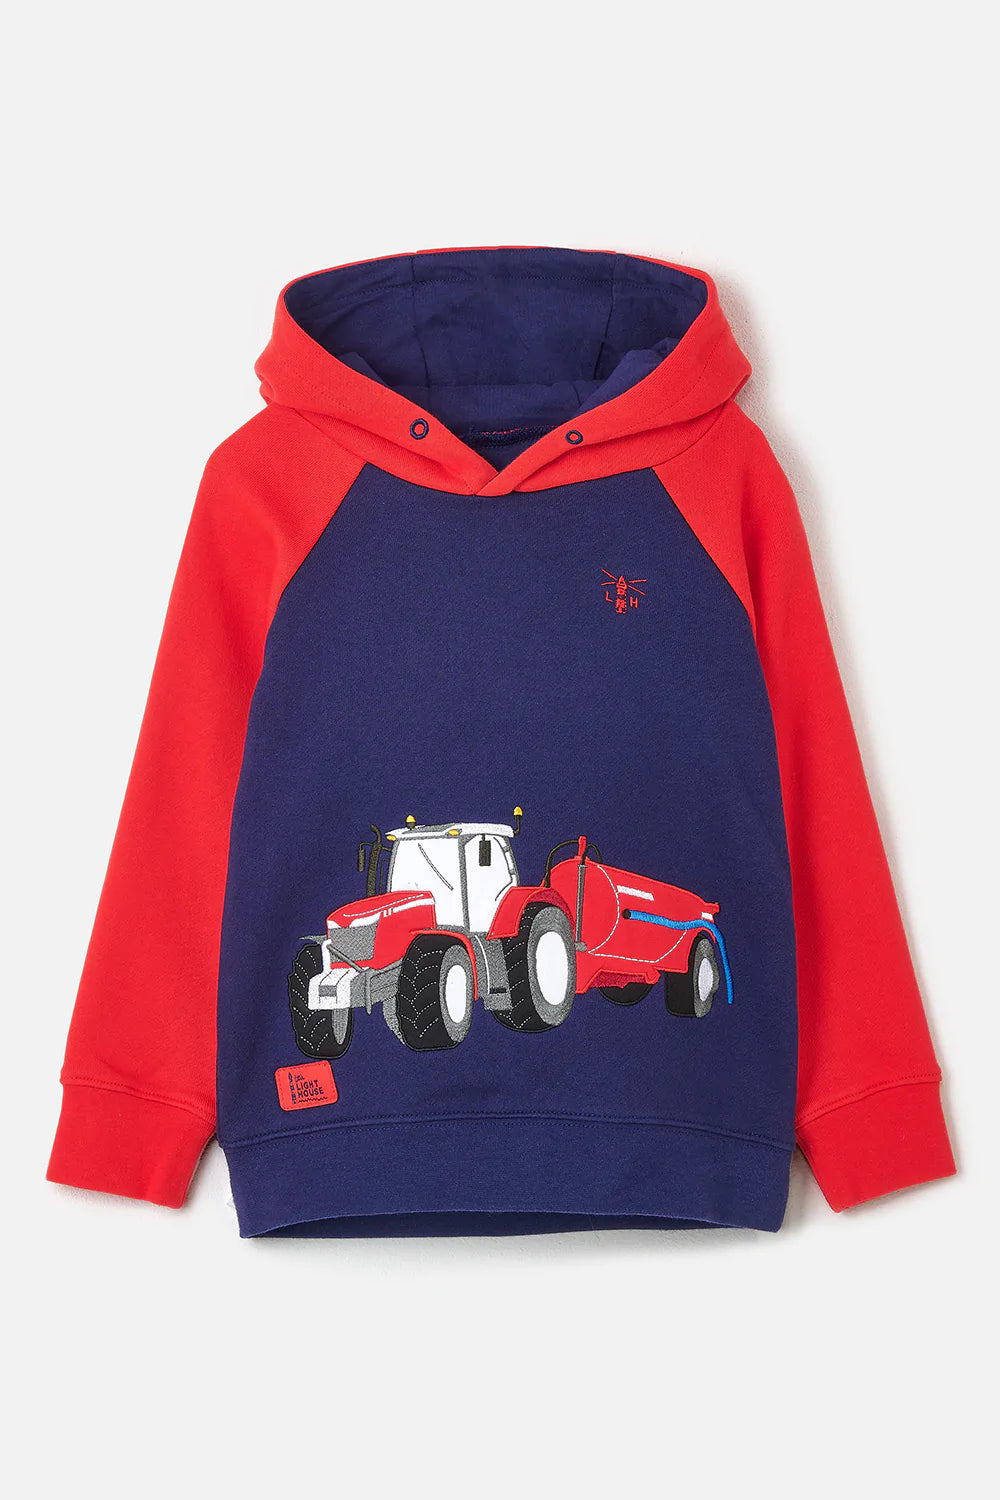 Lighthouse Jack Hoodie with Tractor & Slurry Tanker - Red & Navy